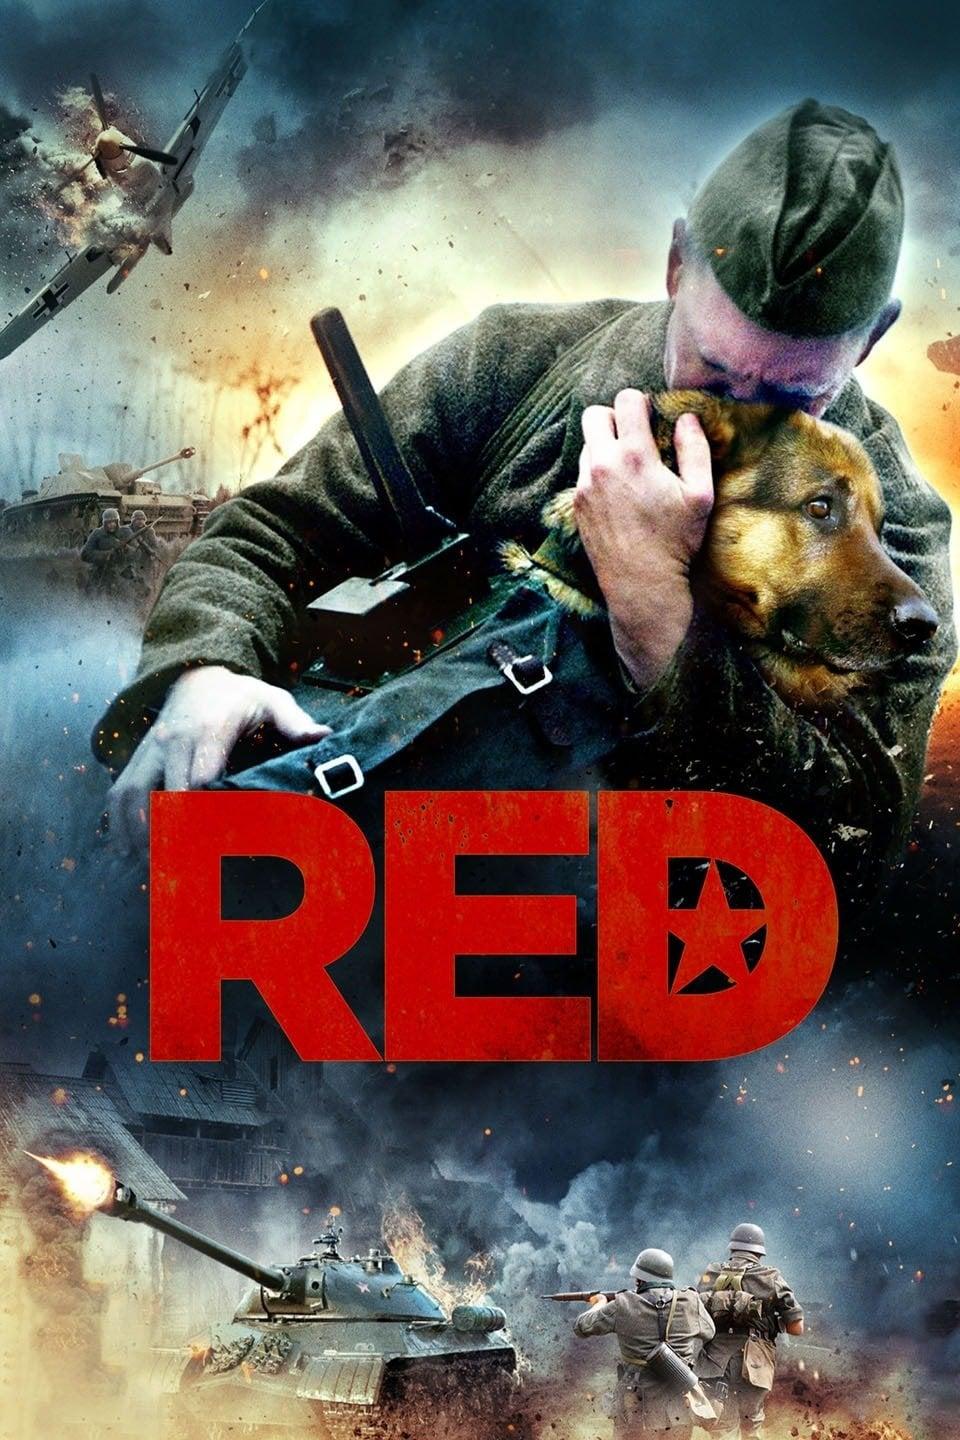 Red Dog poster